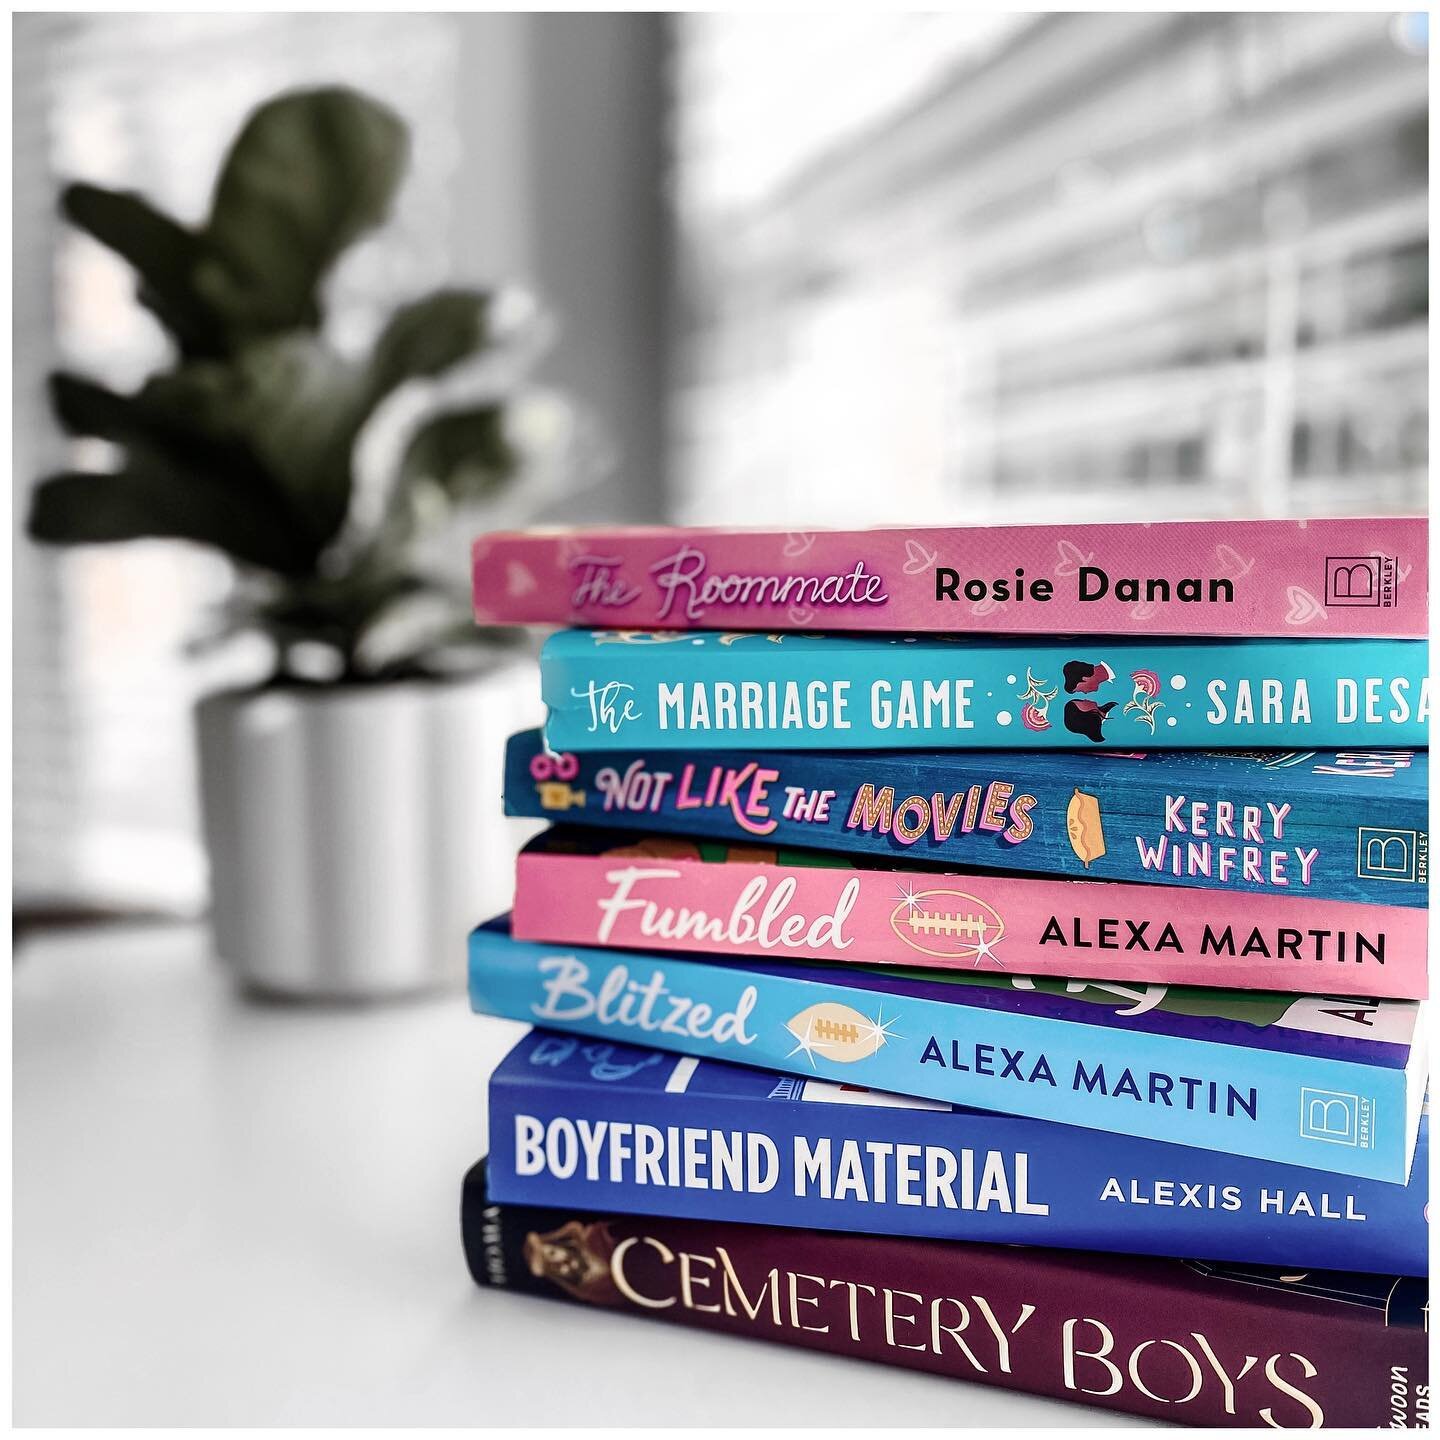 a little book haul ✨

Stopped by the bookstore a few days ago to finally pick up CEMETERY BOYS and some other books just happened to fall into my hands. Not my fault at all. 

Books I&rsquo;m the most excited about: the rest of Alexa Martin&rsquo;s P